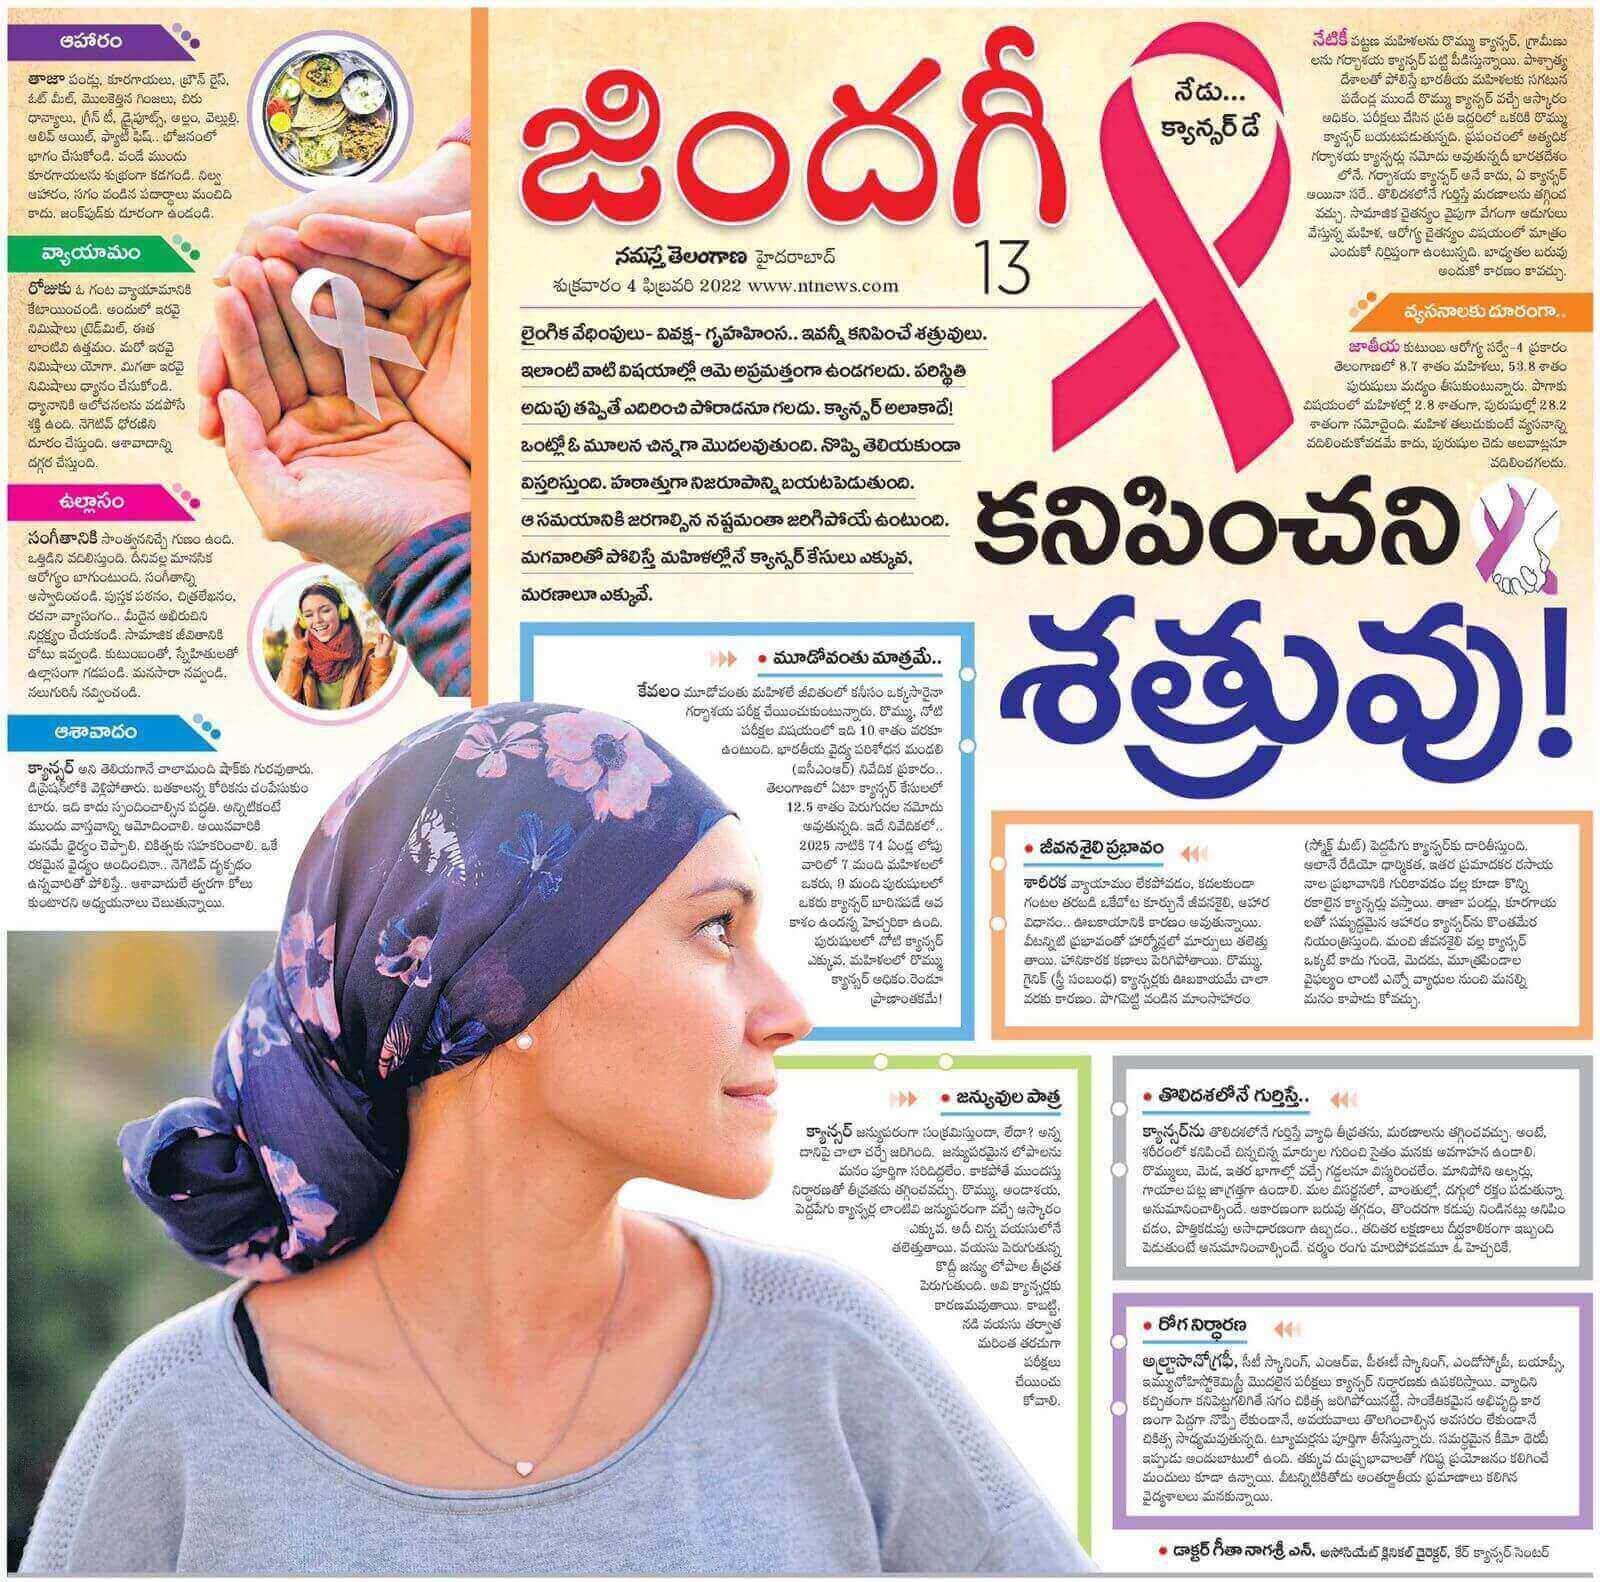 Article on World Cancer Day by Dr. Geetha Nagasree N - Consultant Surgical Oncologist